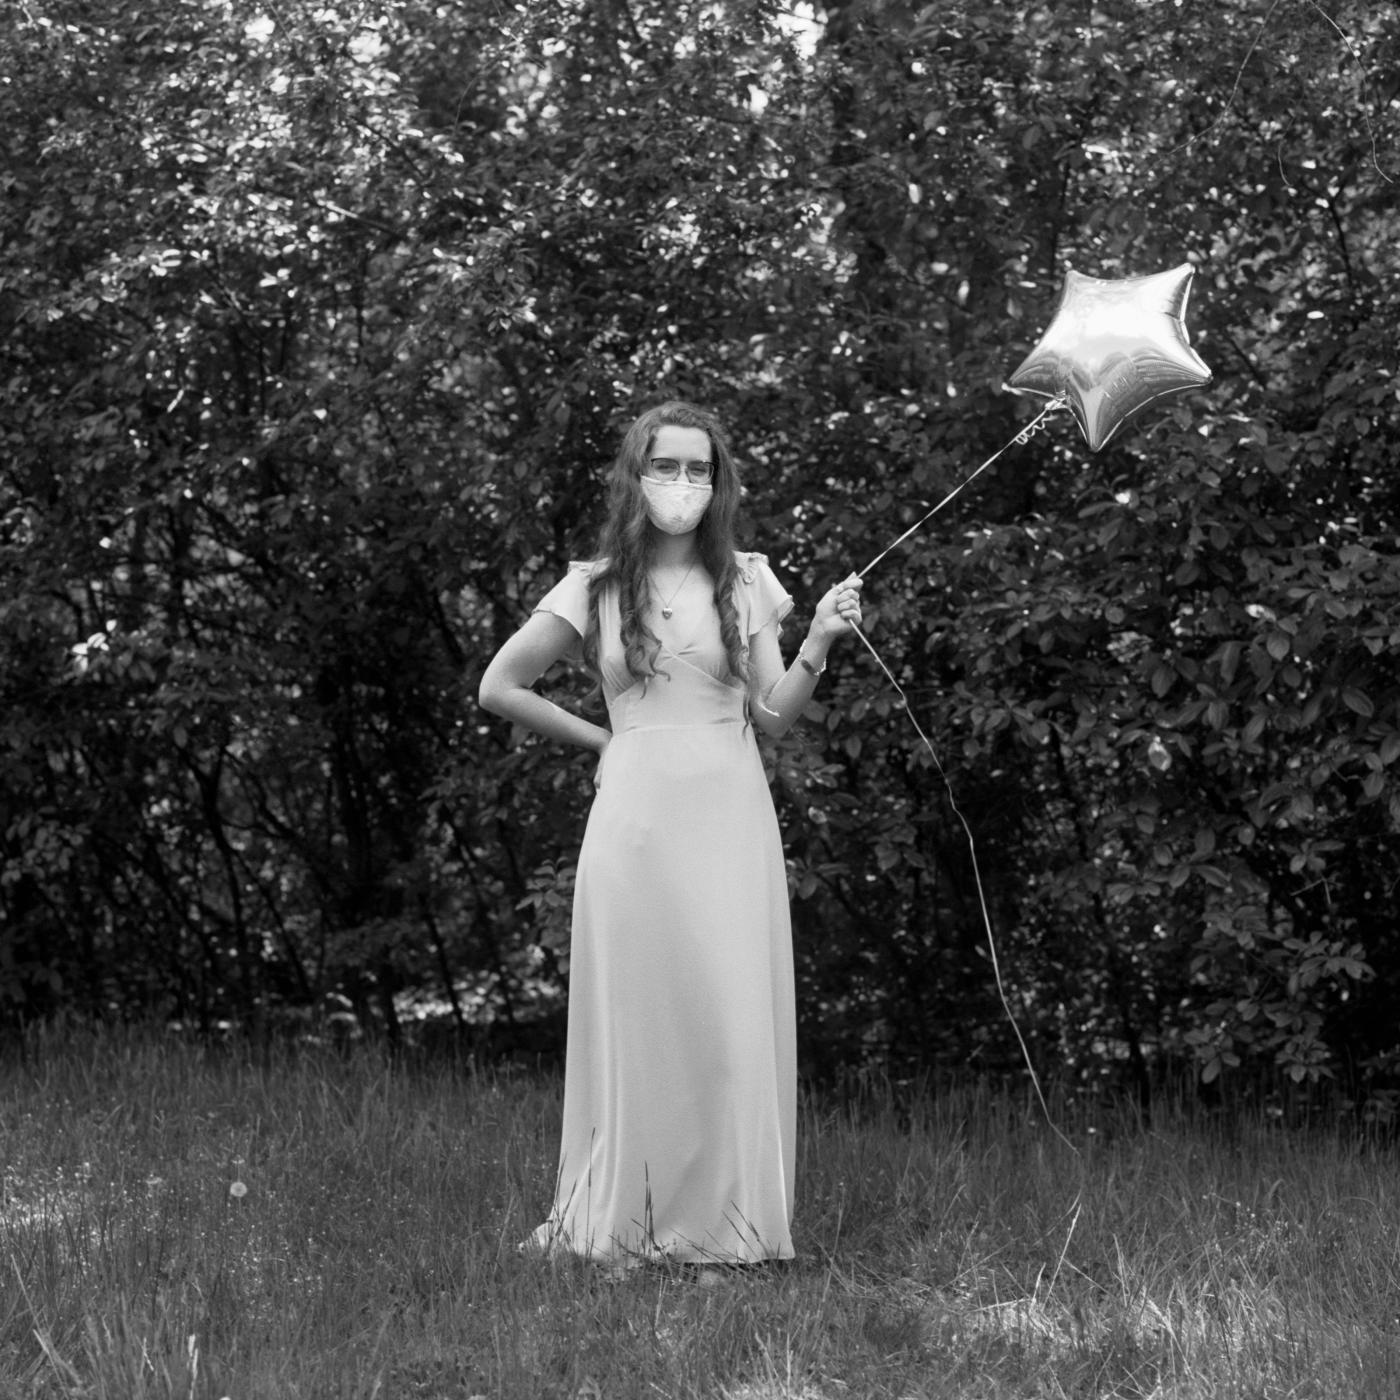 Image from Black & White  - Zandra on the day of her college graduation, May 2021